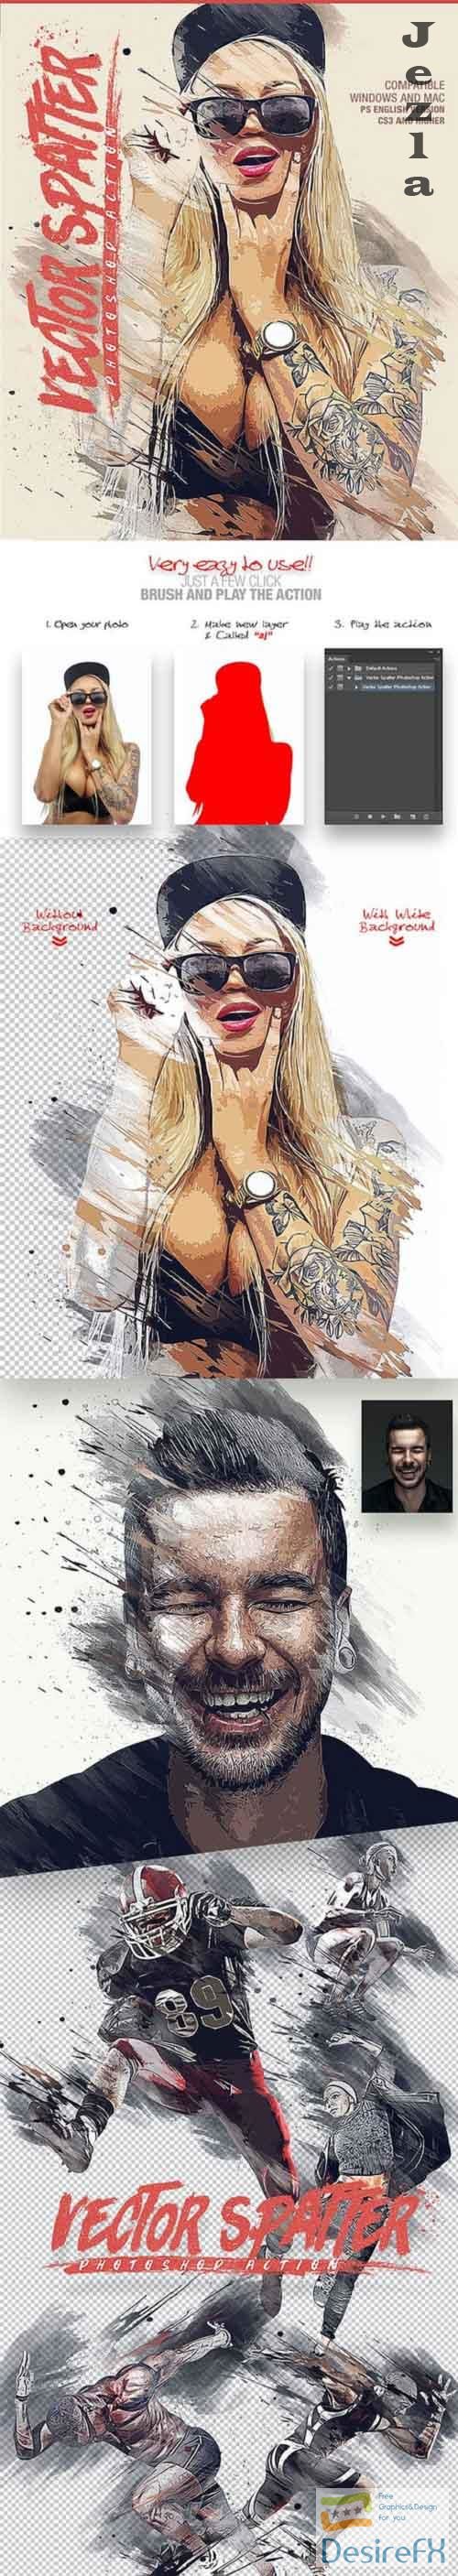 Vector Spatter Photoshop Action 27115313